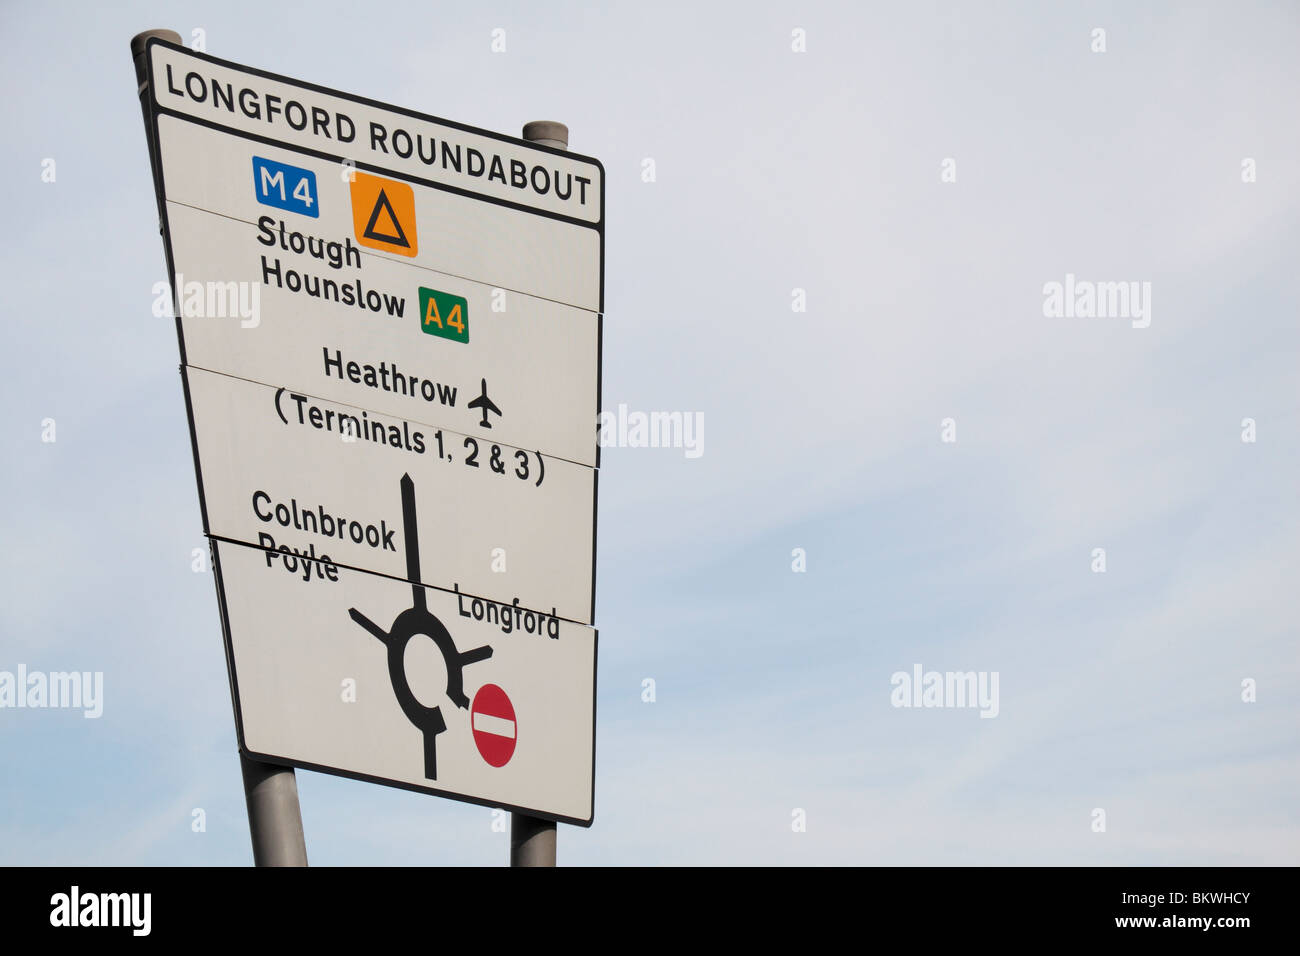 A road sign (on Longford roundabout) close to Heathrow Airport, London, UK. Stock Photo